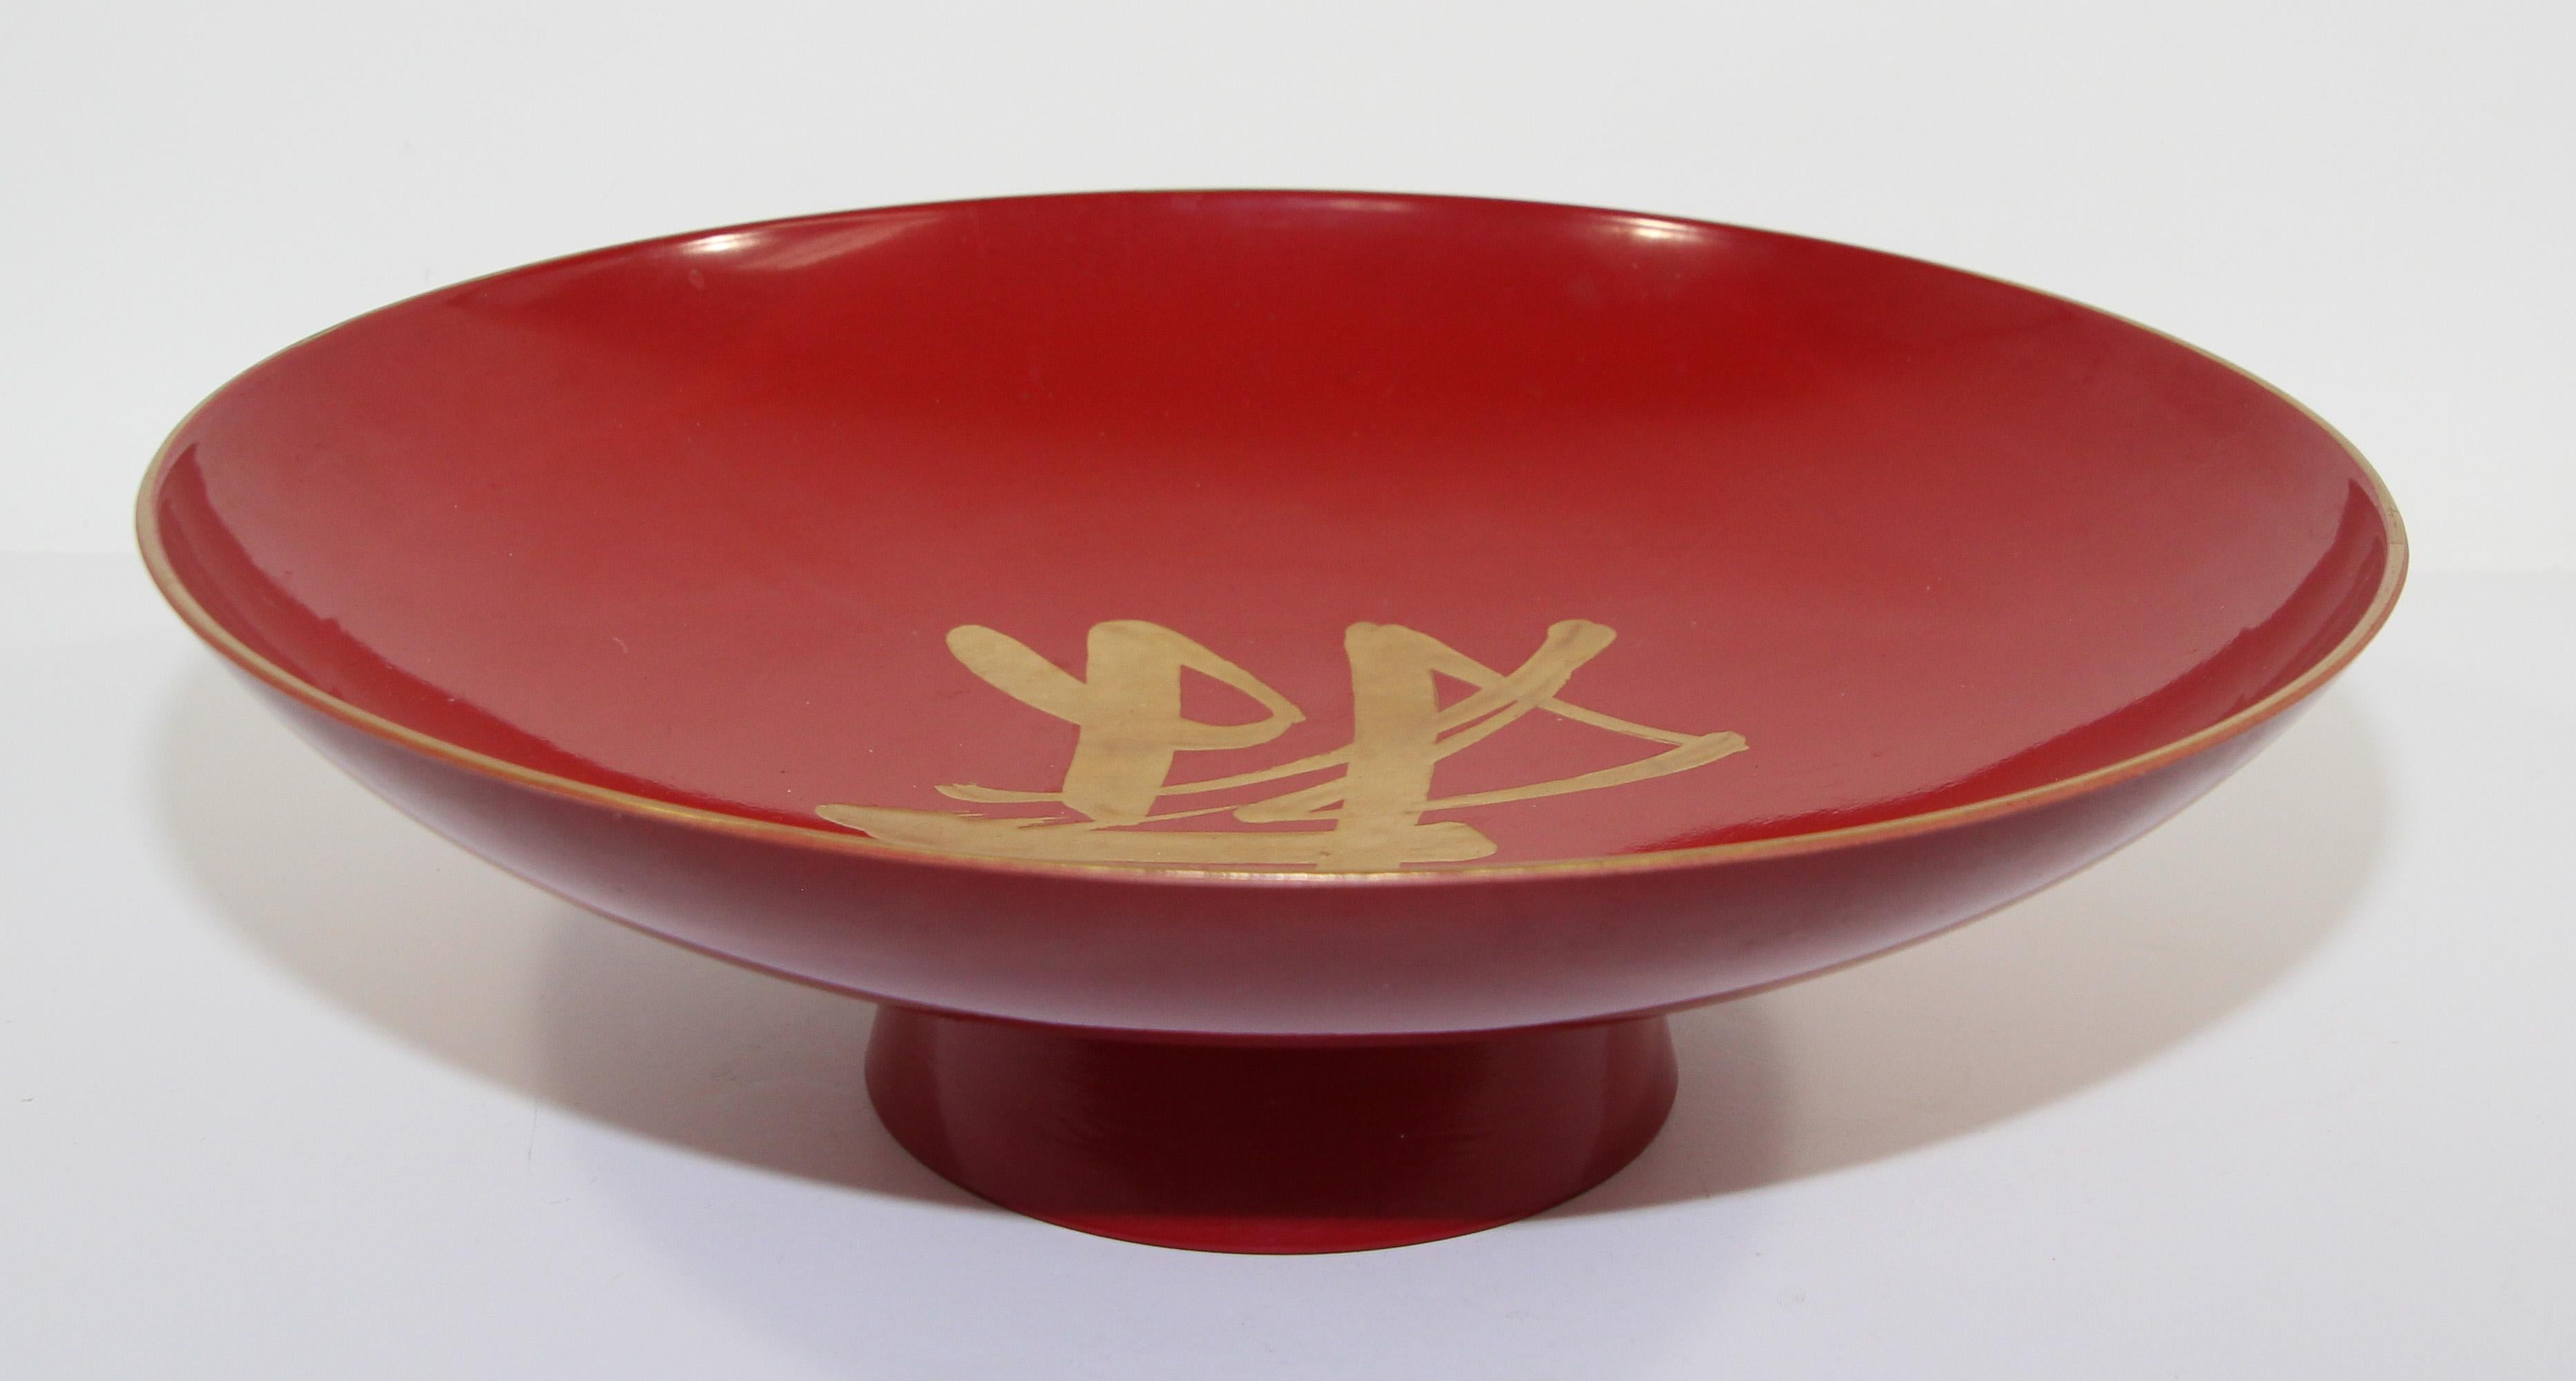 Large vintage Japanese shallow footed bowl in red lacquer with gold calligraphy design.
This beautiful lacquerware were made to serve foods during elaborate banquet.
Great decorative Asian bowl centerpiece will add a chic statement to a your